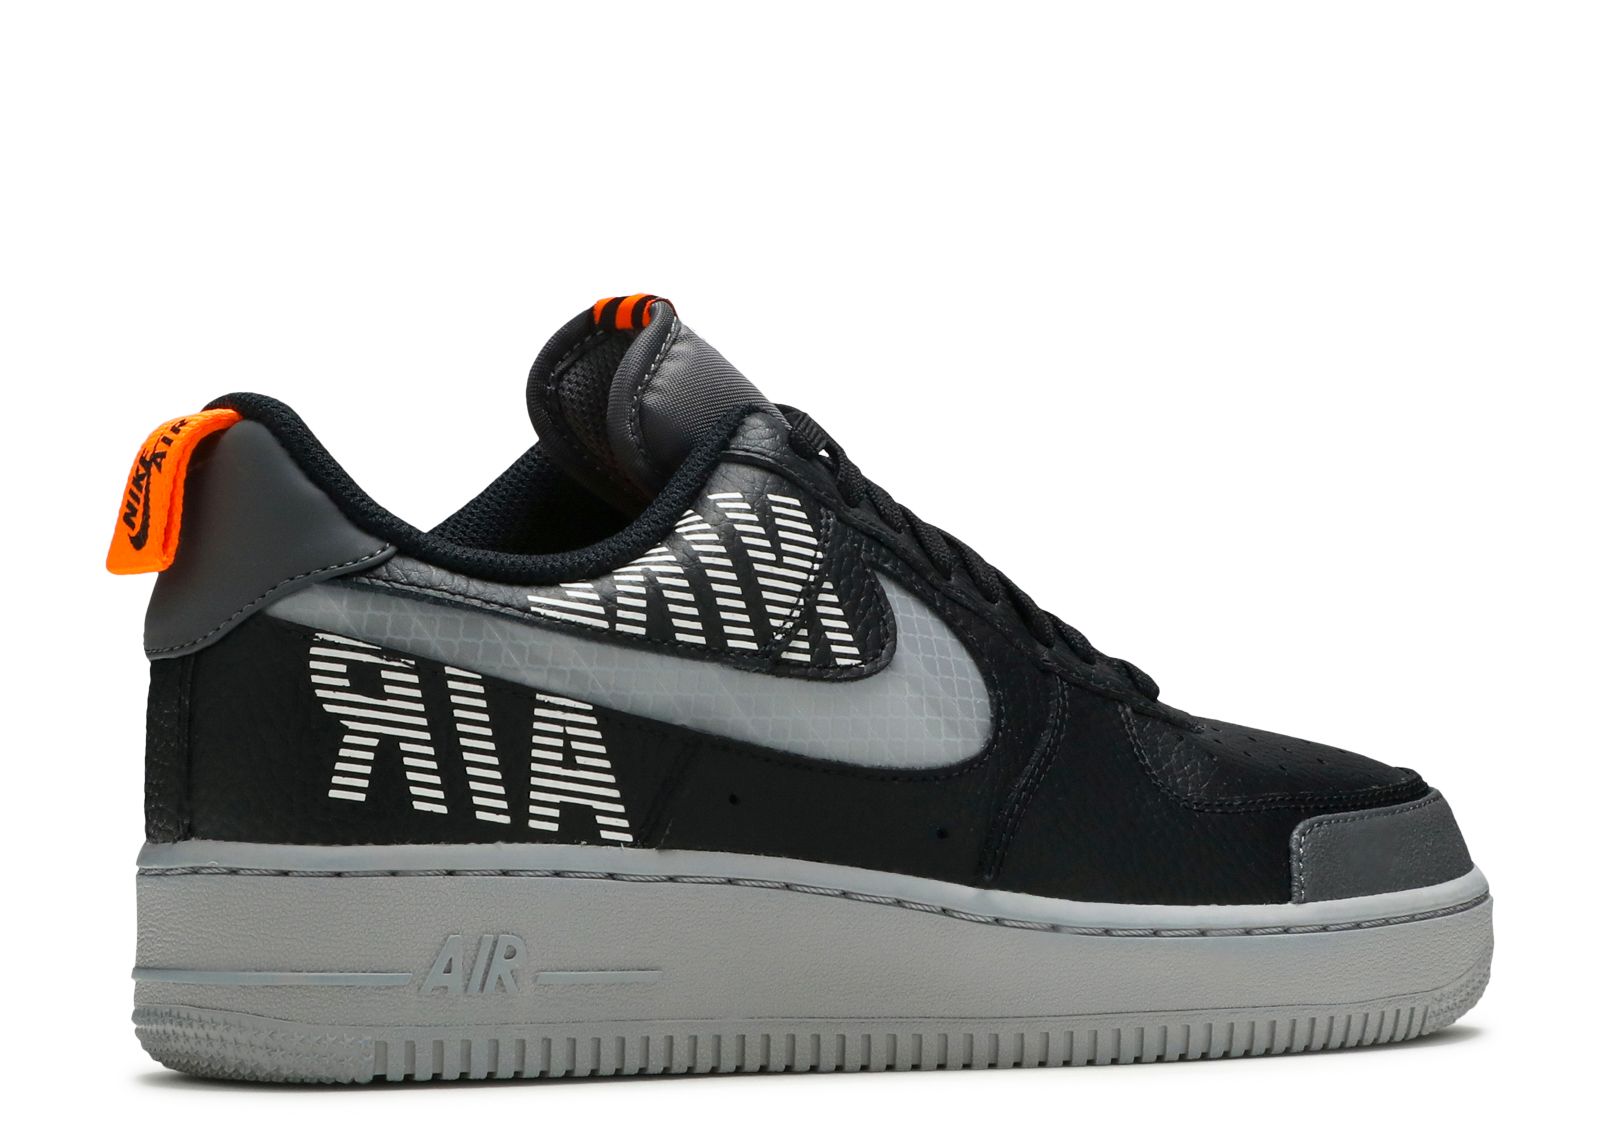 Nike Air Force 1 Low LV8 Under Construction Black (GS)